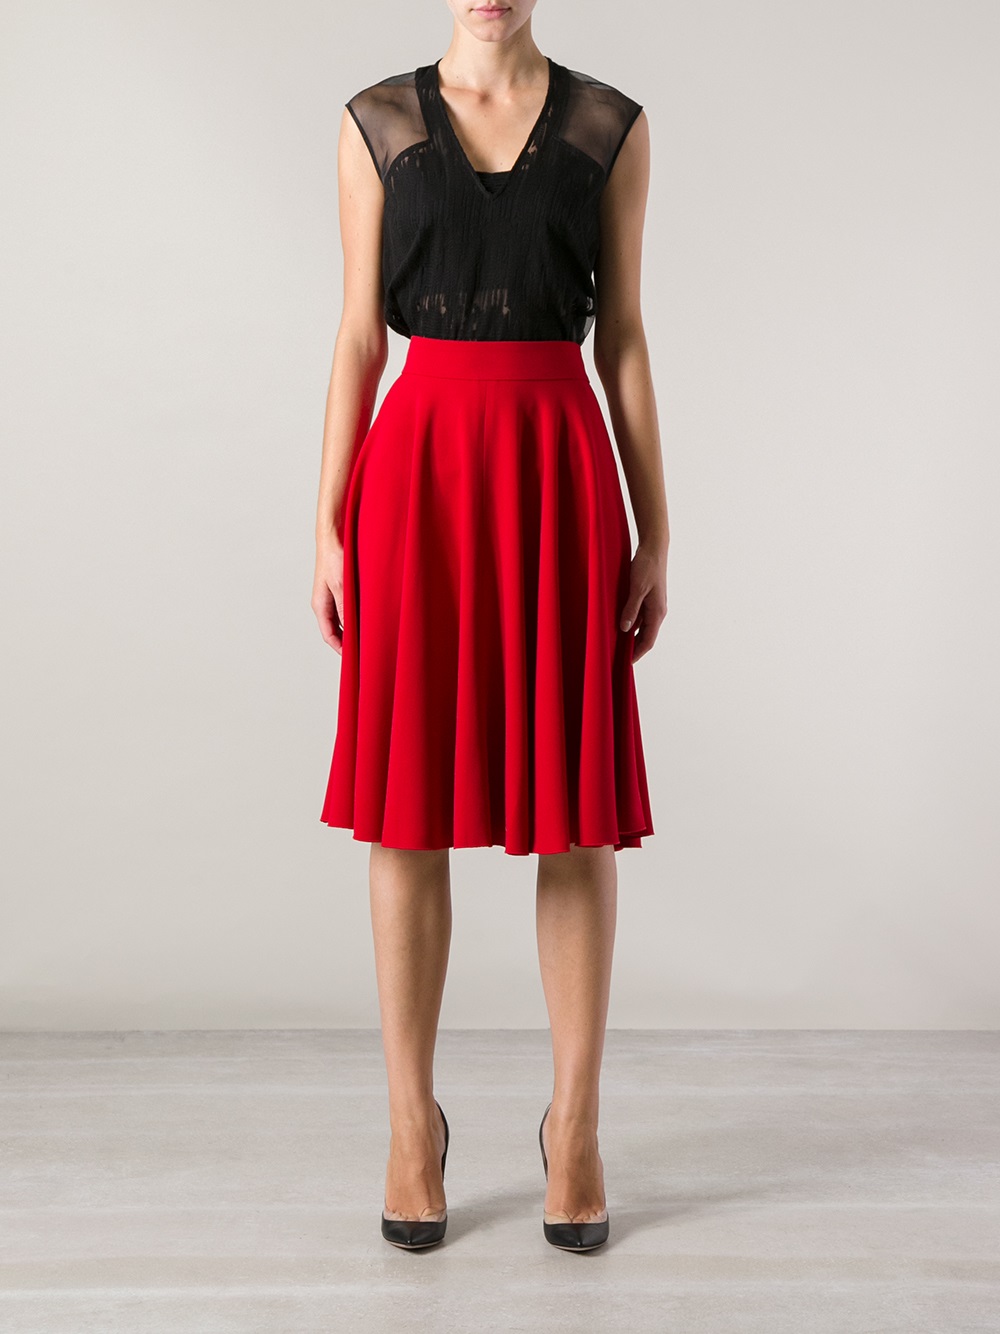 Dolce & Gabbana Pleated Skirt in Red - Lyst